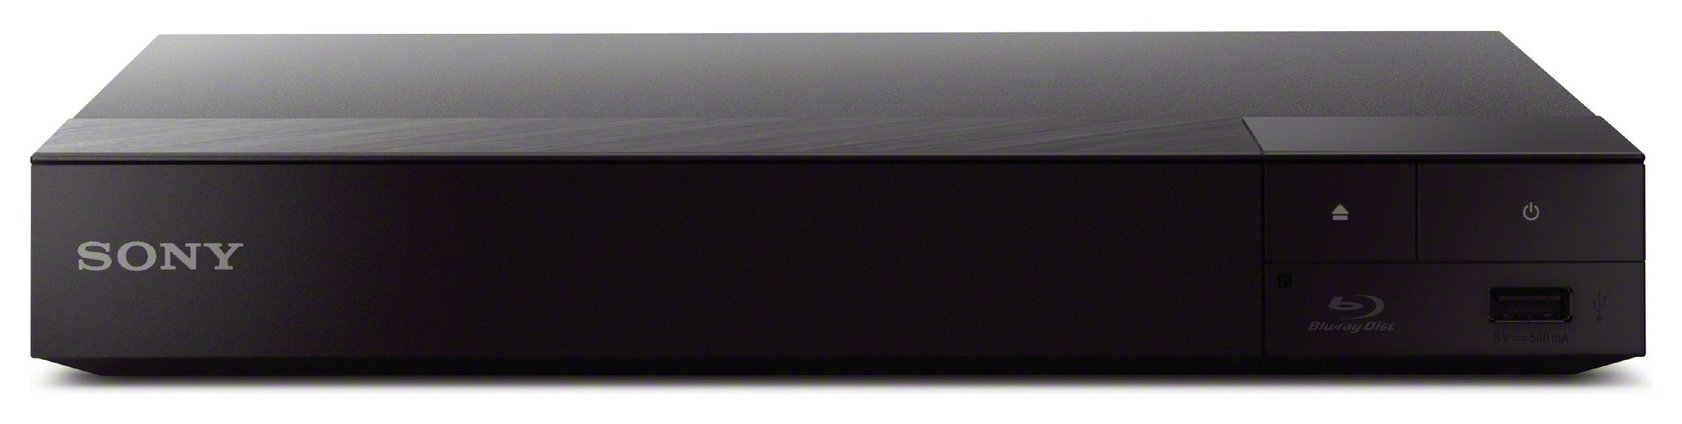 Sony BDPS6700B Smart Blu Ray Player with Playstation Now